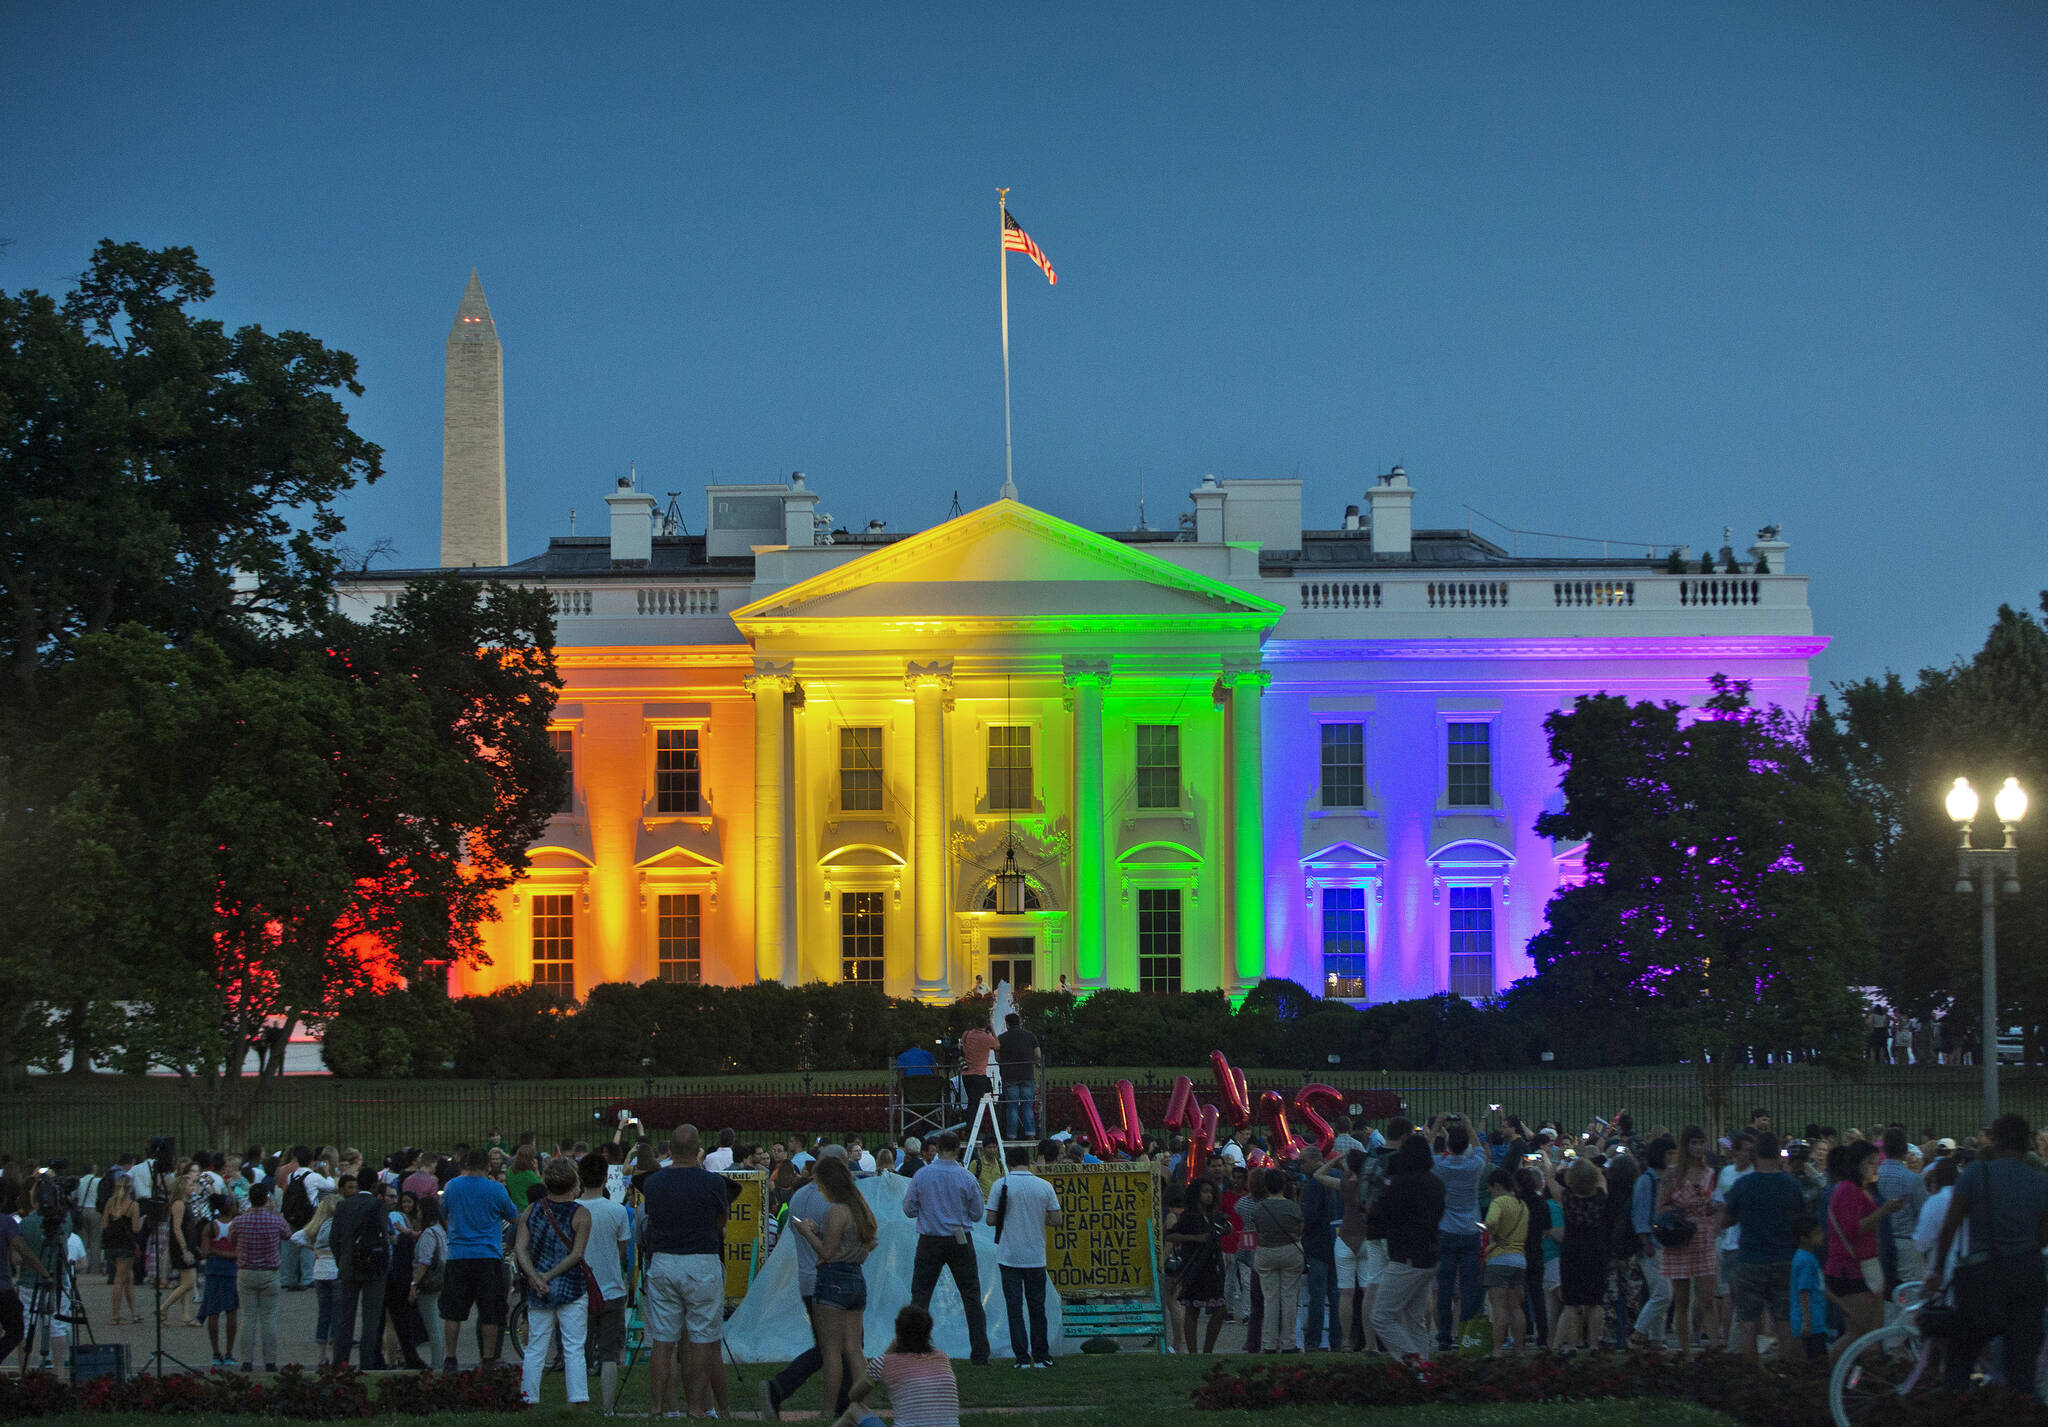 People gather in Washington’s Lafayette Park to see the White House illuminated with rainbow colors to mark the U.S. Supreme Court’s ruling to legalize same-sex marriage, June 26, 2015. President Joe Biden plans to sign legislation this coming week that will protect gay unions even if the Supreme Court revisits its ruling supporting a nationwide right of same-sex couples to marry. It’s the latest part of Biden’s legacy on gay rights, which includes his unexpected endorsement of marriage equality on national television a decade ago when he was vice president. (AP Photo / Pablo Martinez Monsivais)